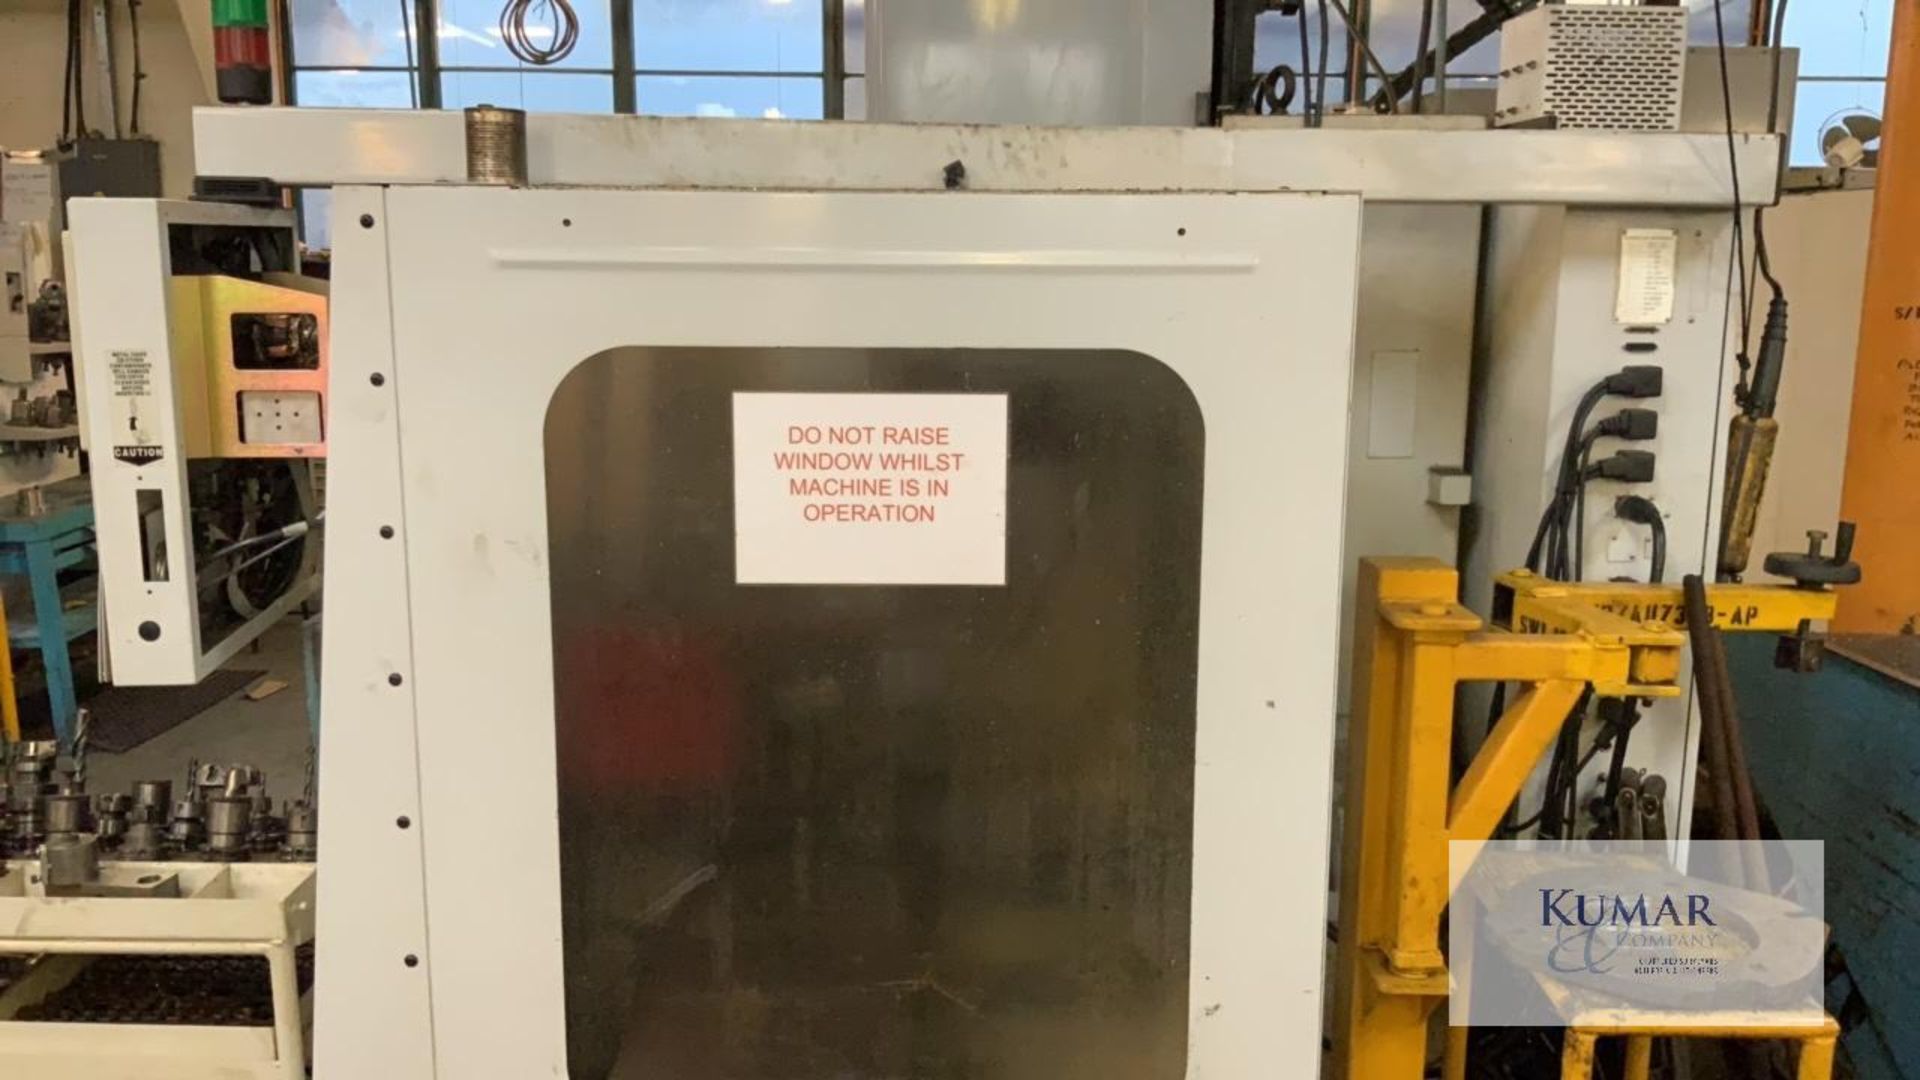 Mikron HAAS VCE 750 Machining Centre, Serial No: 11657, (09/97) with chucks as shown - Image 3 of 10